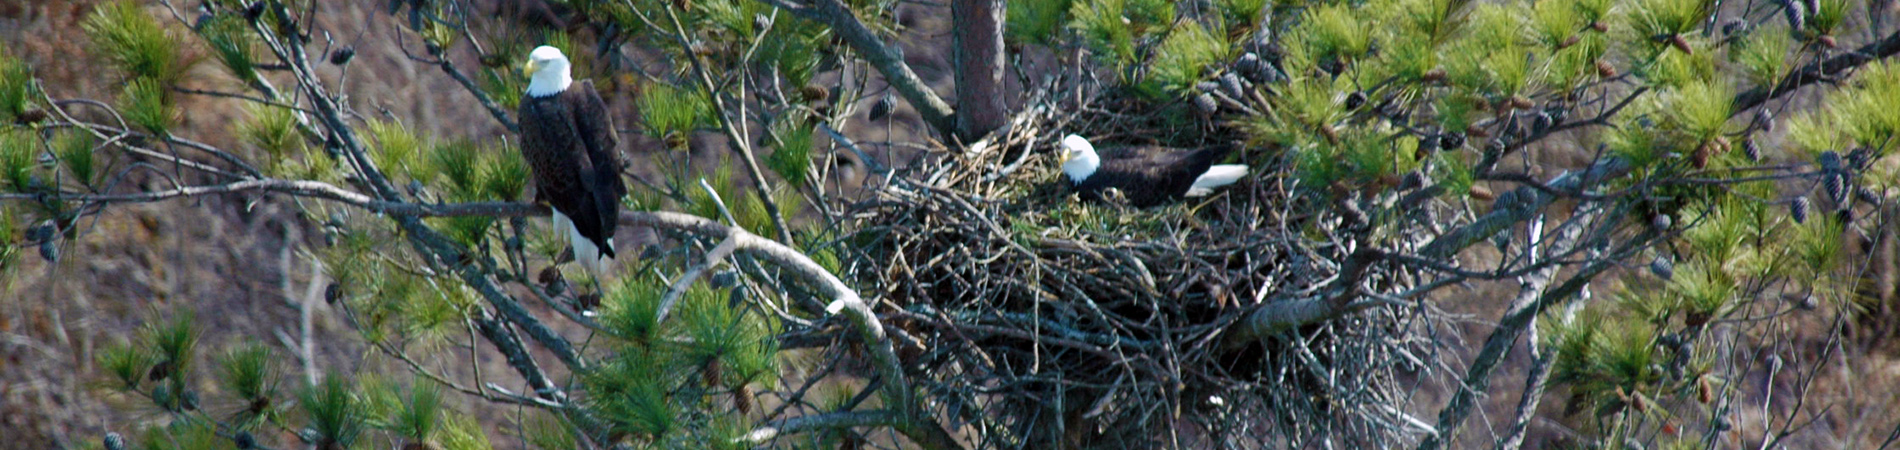 Eagles in Nest